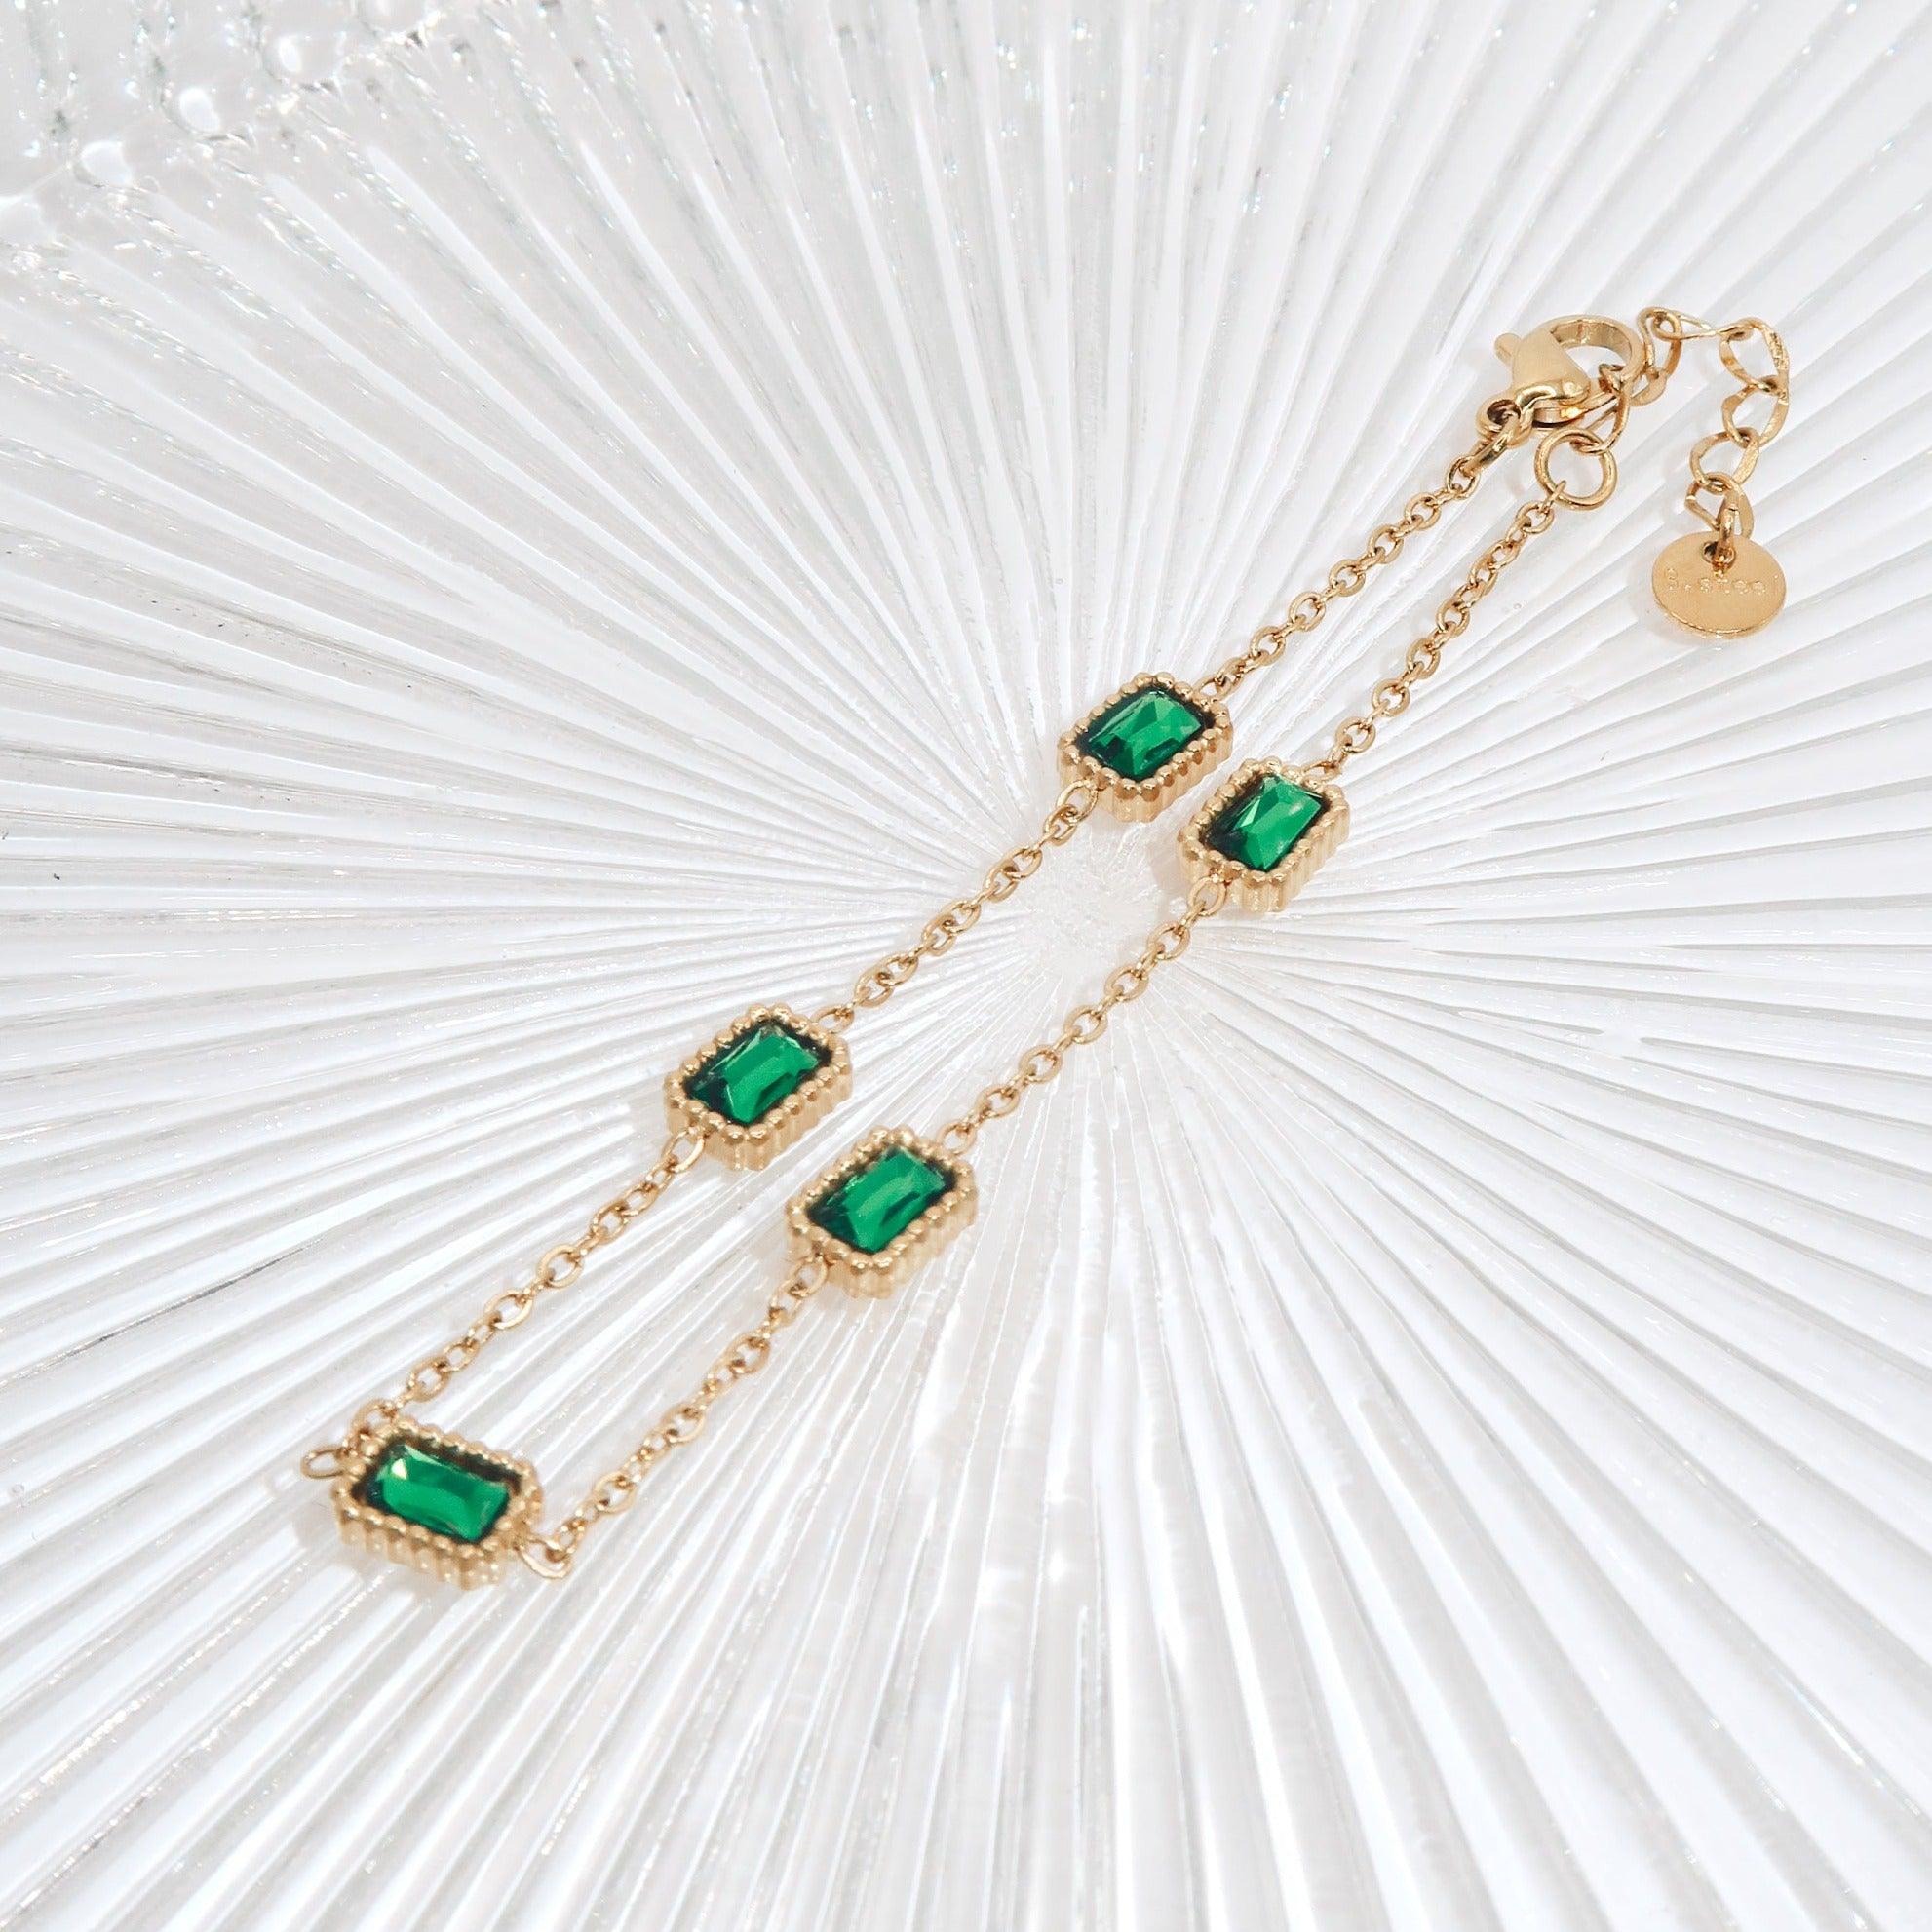 FARAH - 18K PVD Gold Plated Dainty Bracelet with Emerald CZ Stones - Mixed Metals